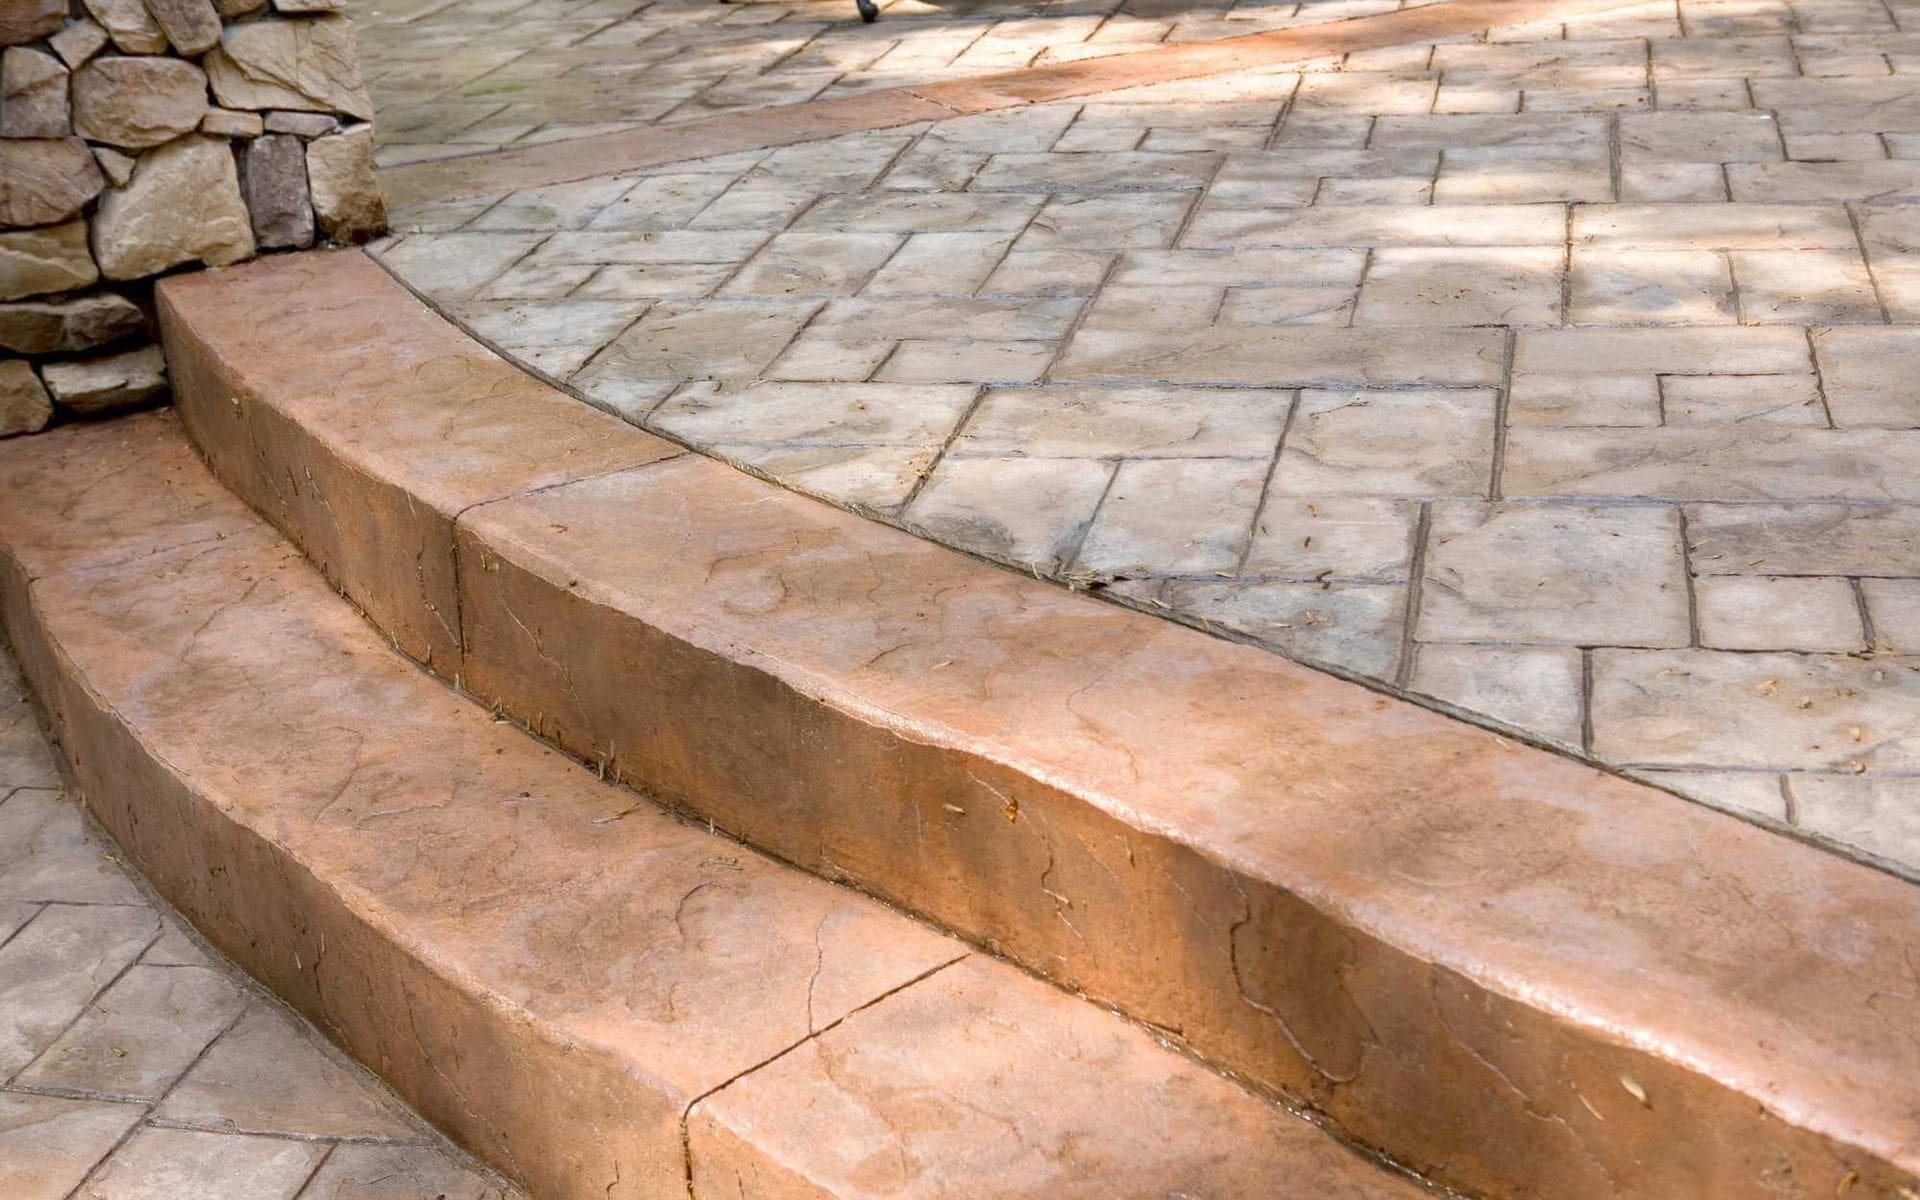 The image shows a close-up of two curved concrete steps with a stamped, textured surface, leading up to a stone wall. The steps and the ground have a similar pattern that resembles large cobblestones or pavers. This decorative concrete installation, sunlit in Peoria Arizona, highlights an outdoor setting.